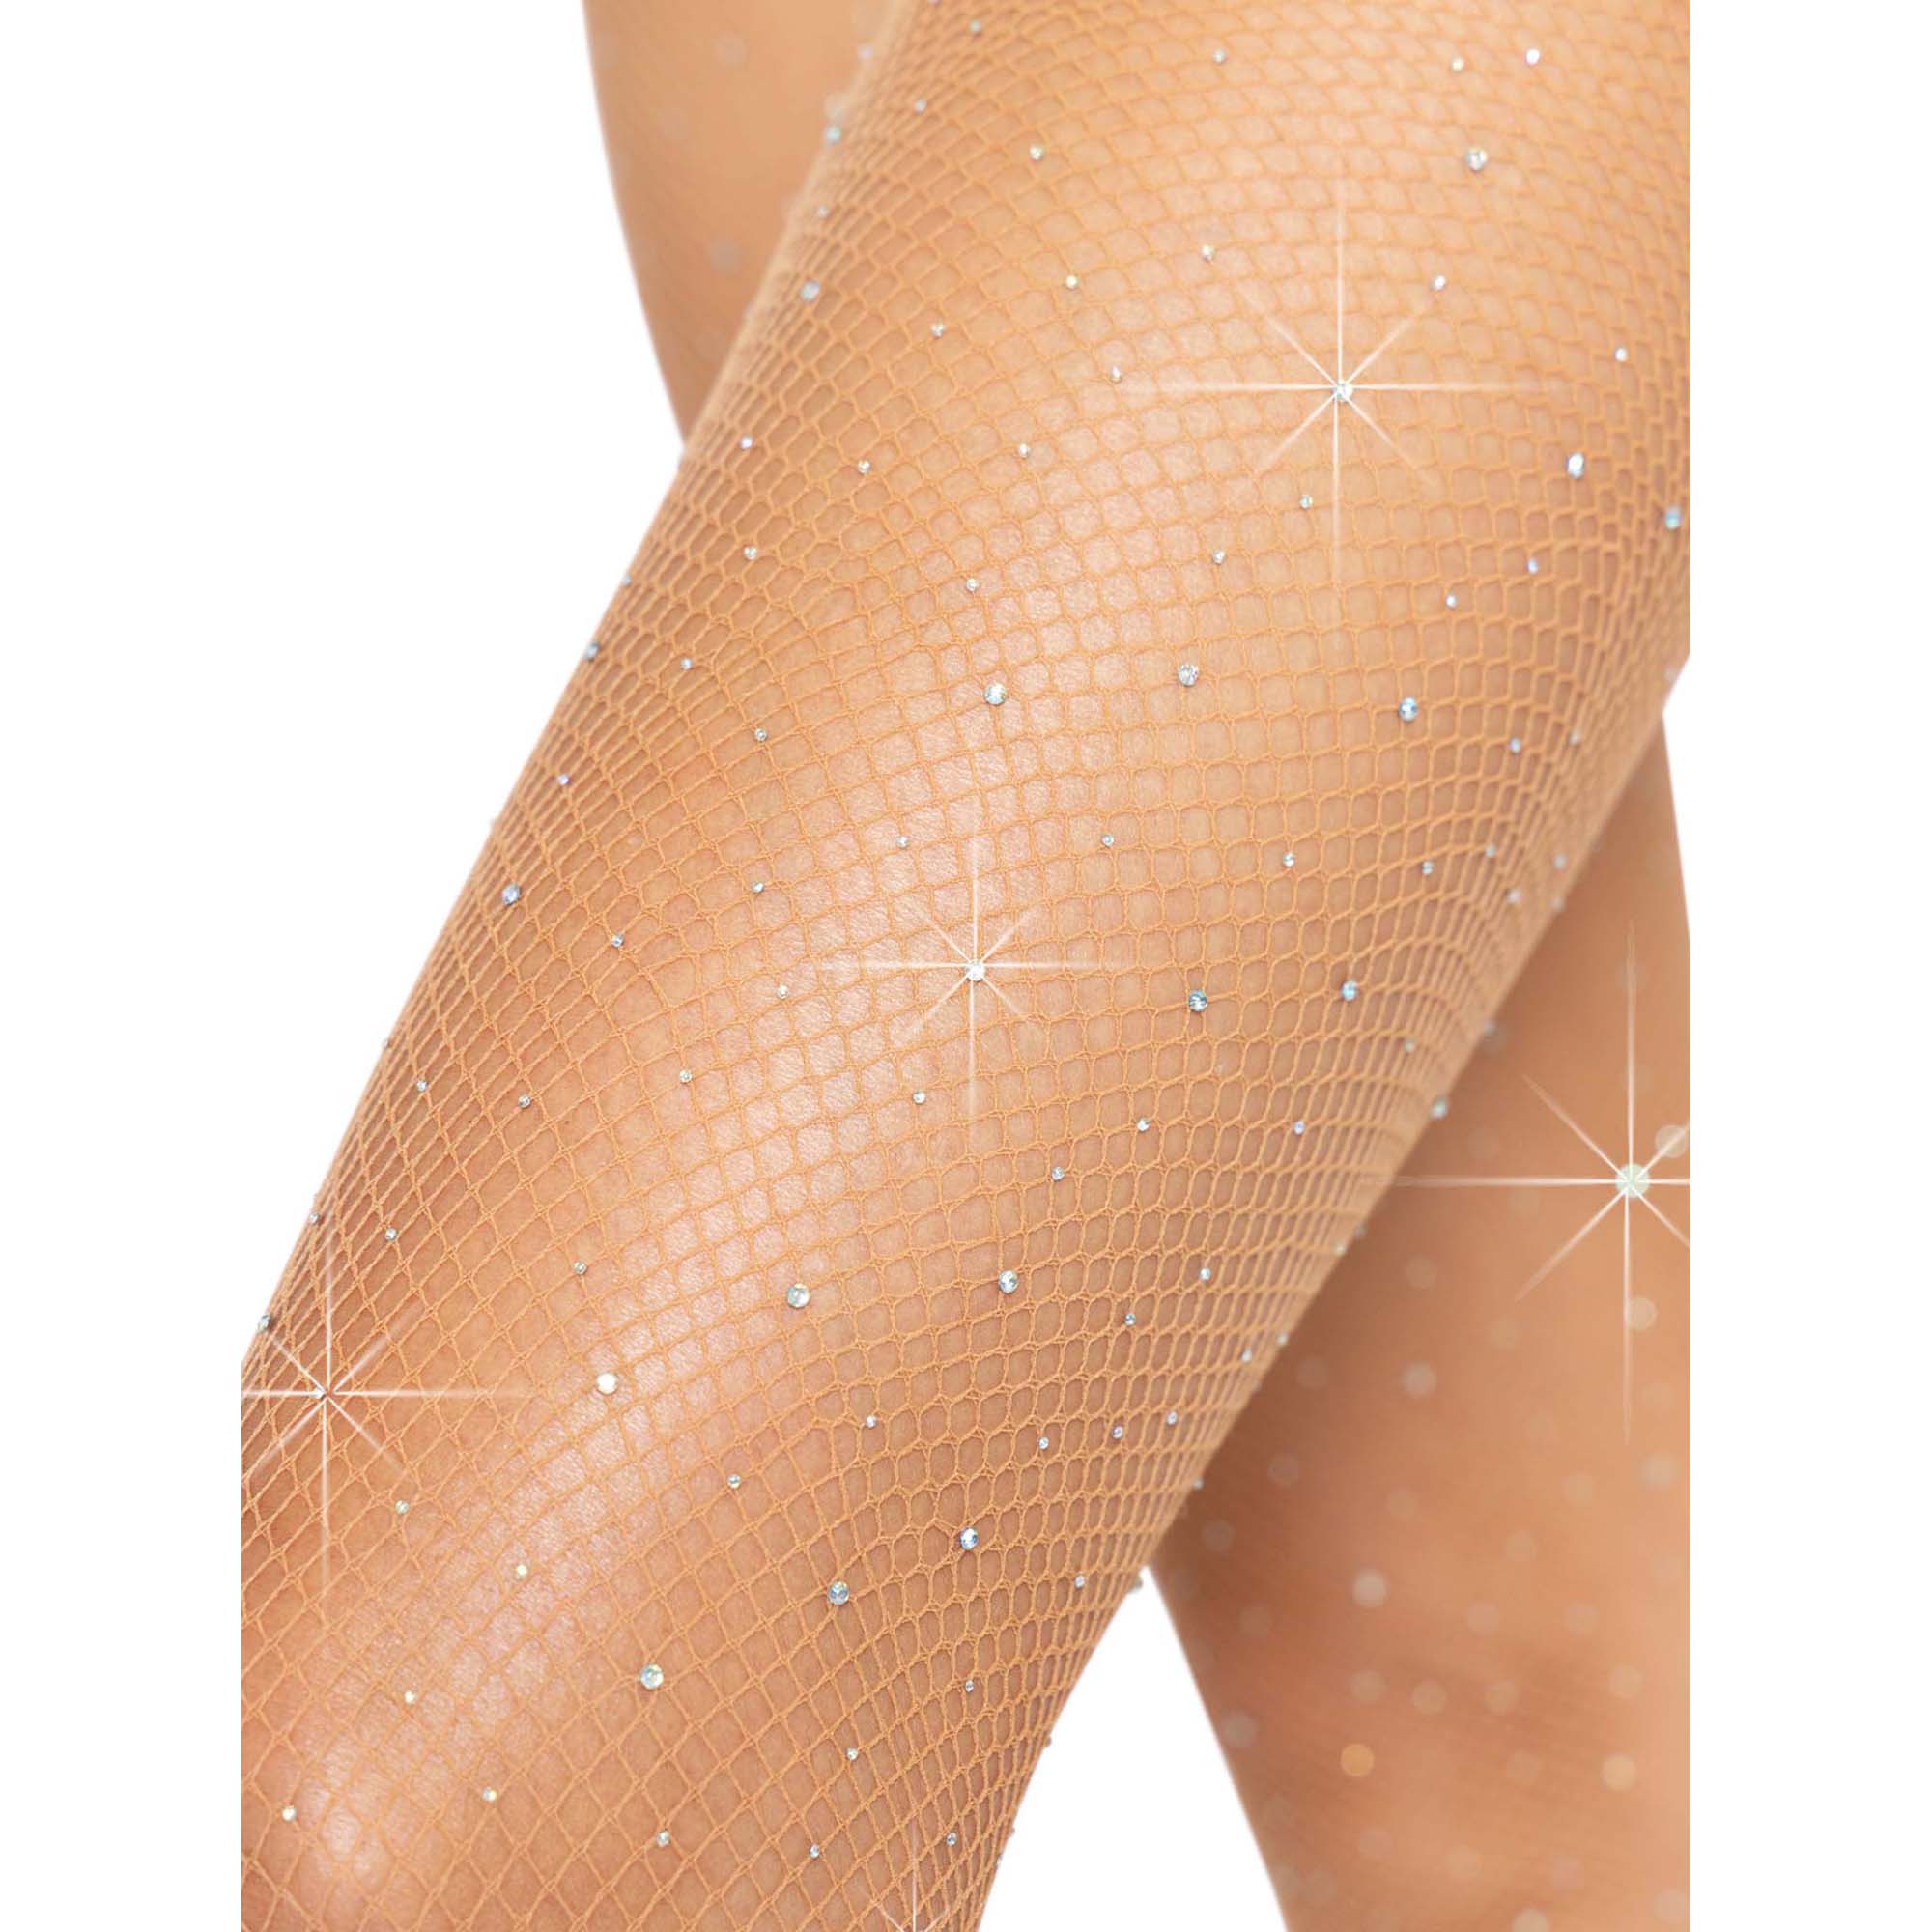 Nude Rhinestone Fishnet Tights for Adults, 1 Count